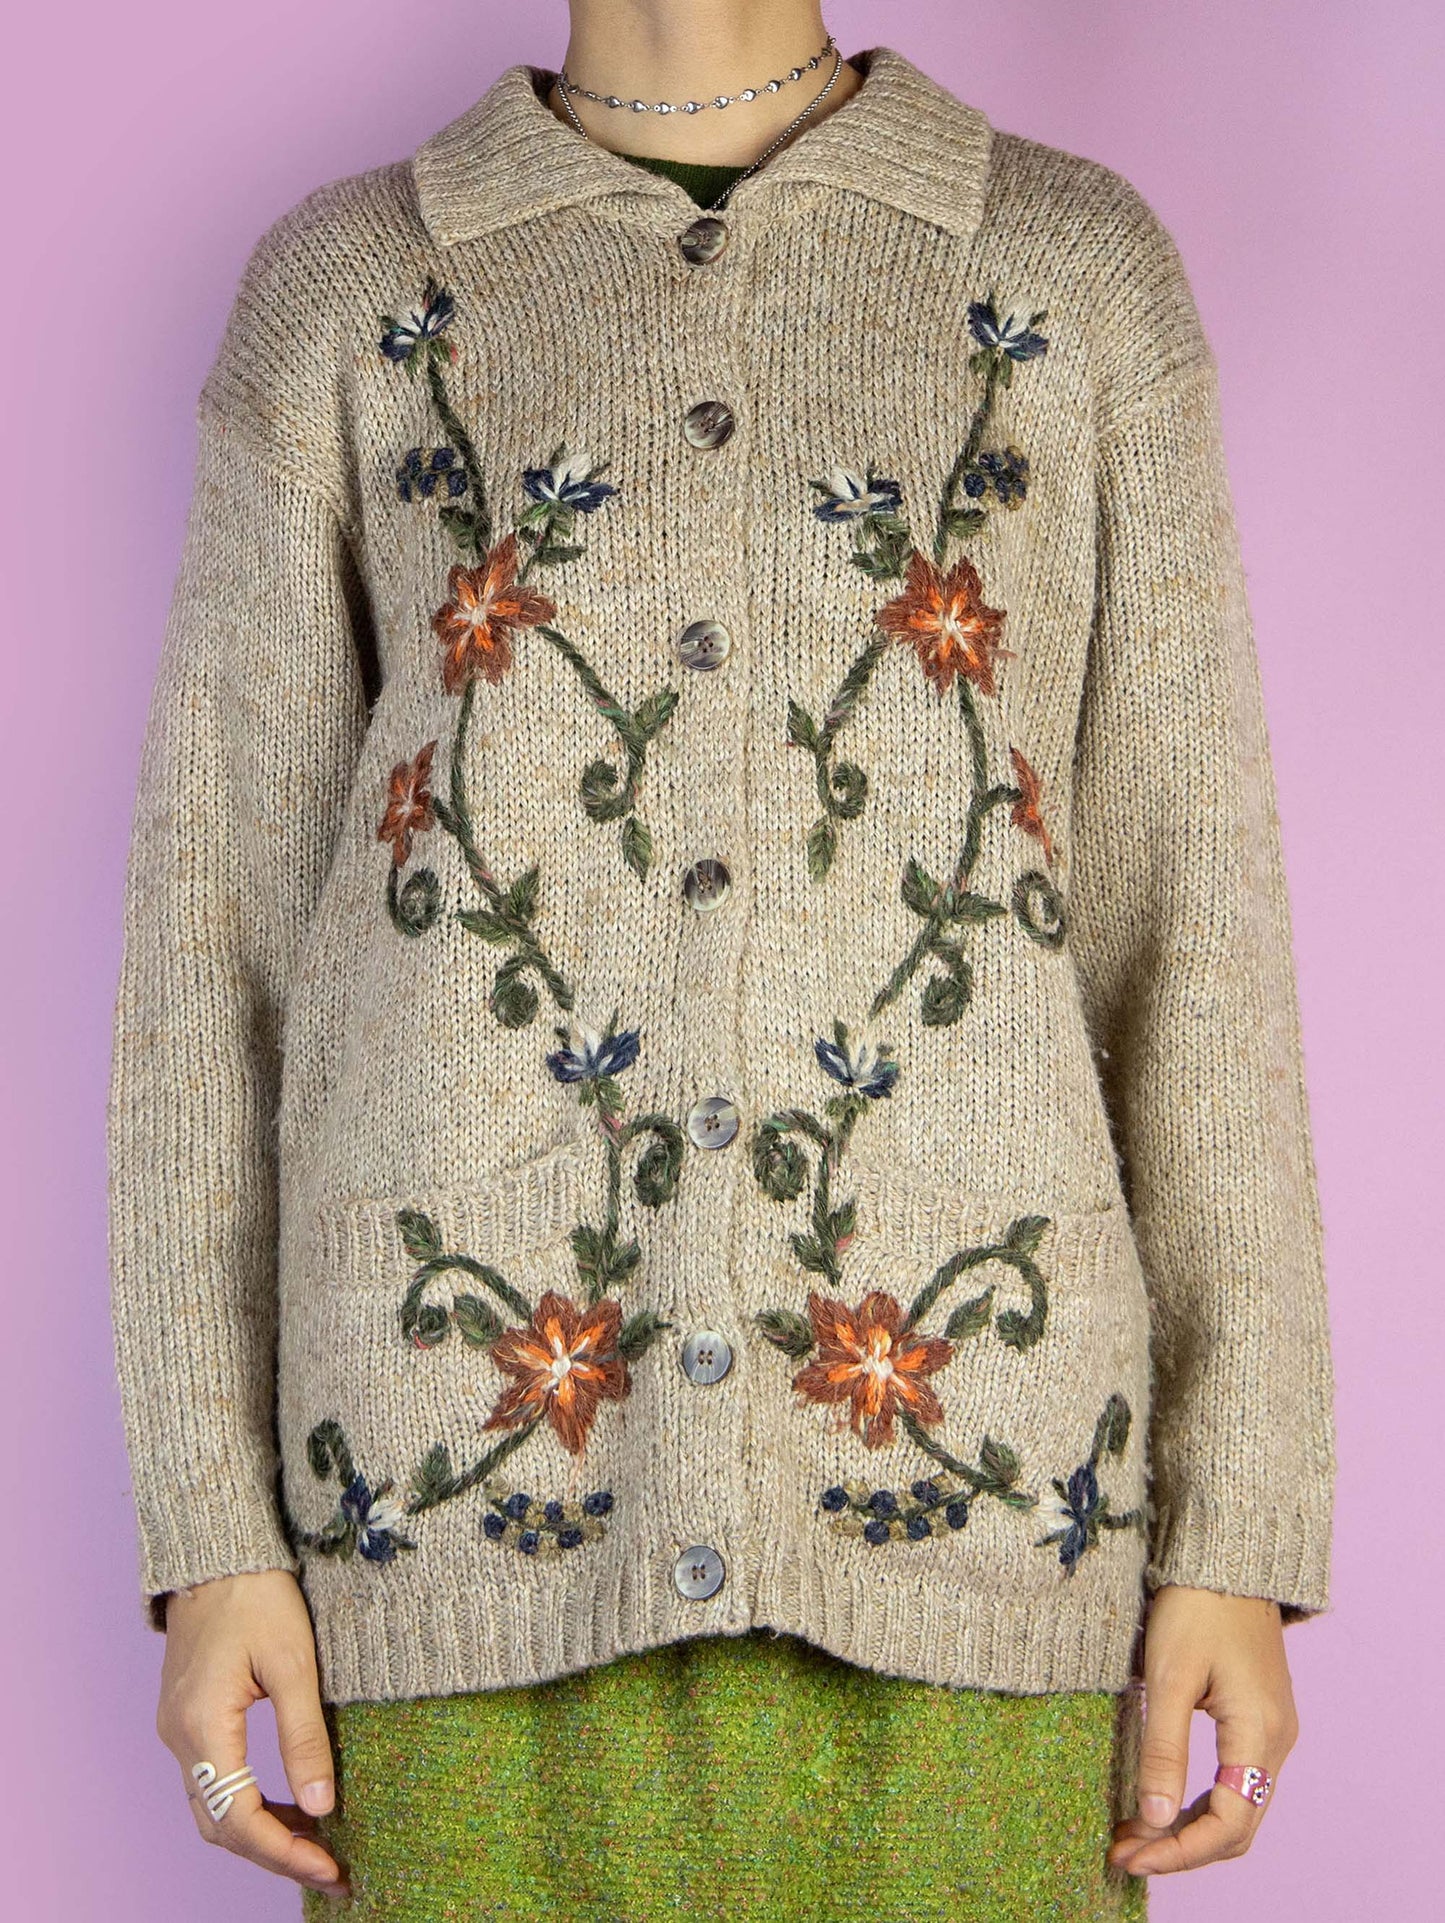 The Vintage 90s Beige Floral Knit Cardigan is a light brown beige cardigan with a collar, pockets, embroidered floral details, and button closure. Boho fairy grunge 1990s knitted sweater.